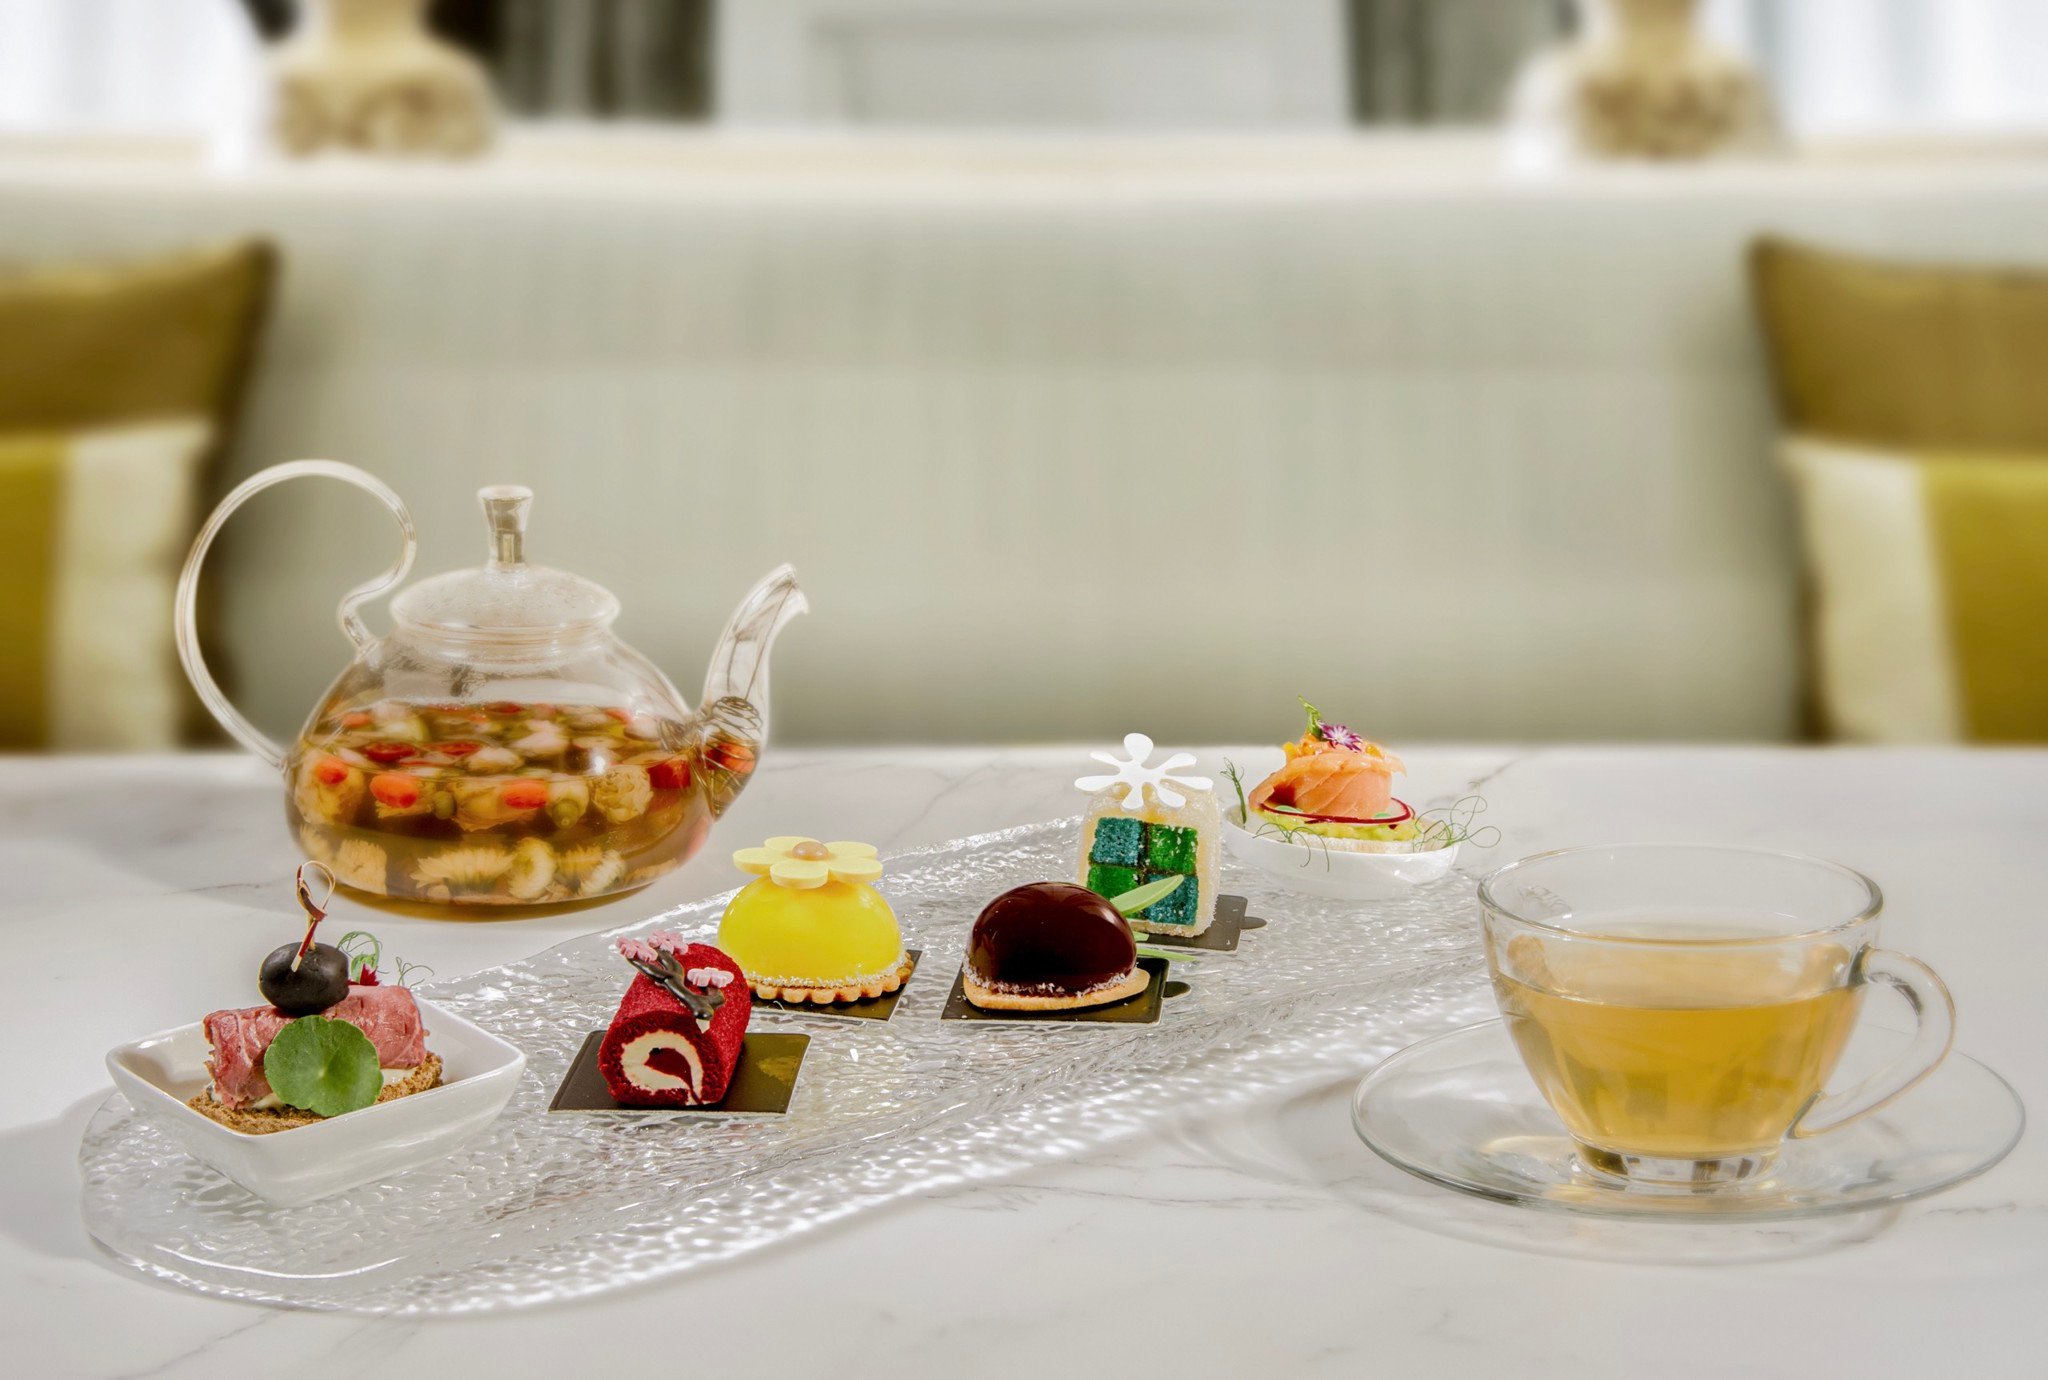 Be Glamorous With Our Thom Hightea!